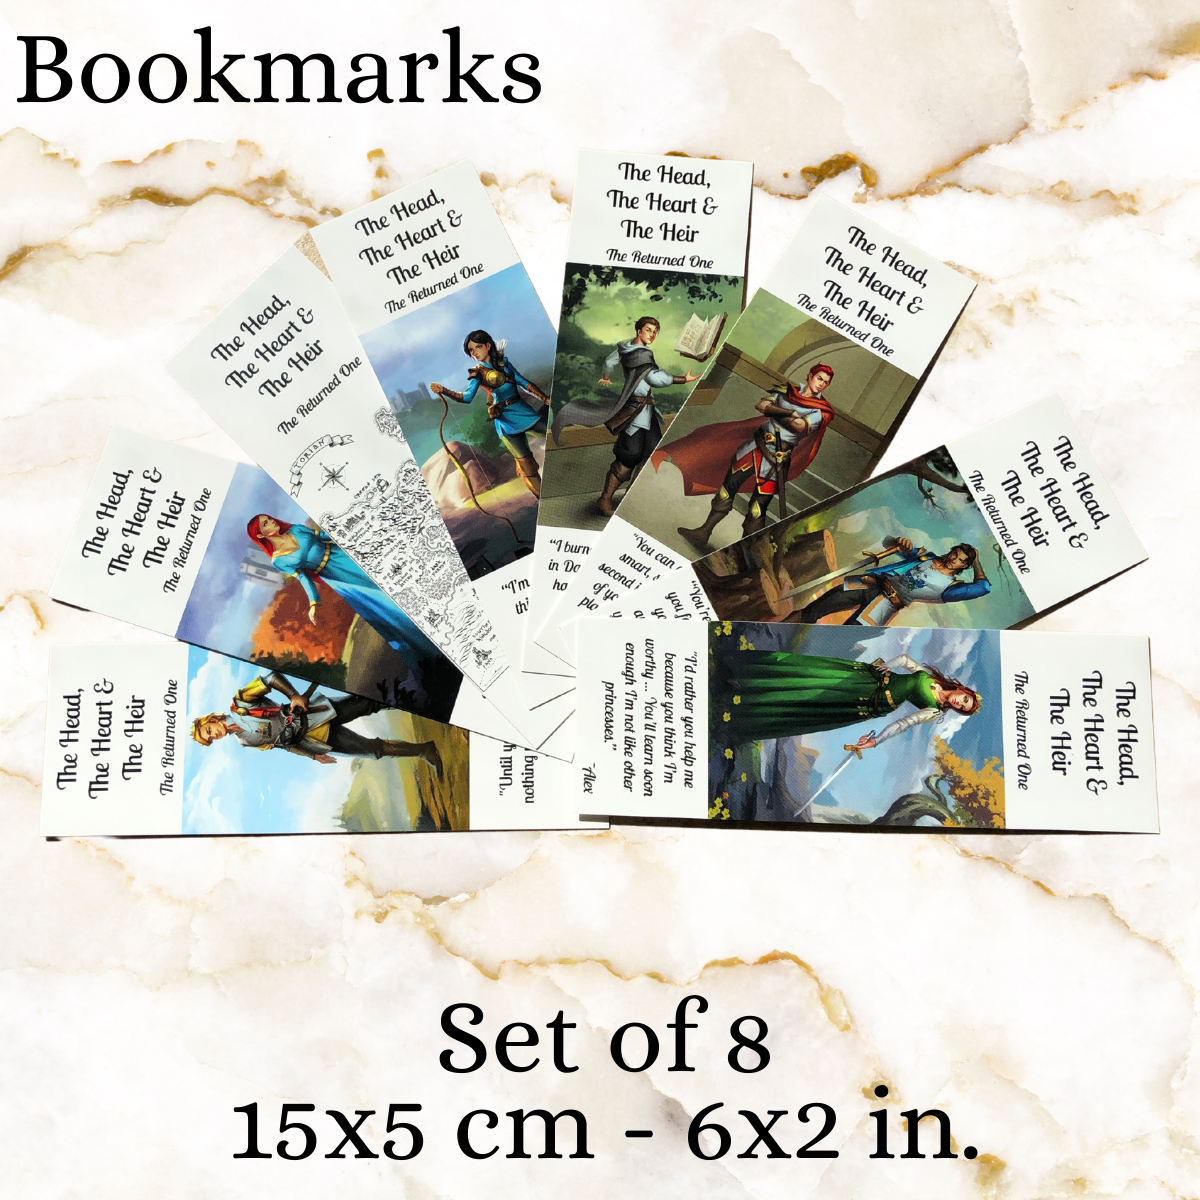 Image of all 8 booksmarks fanned out